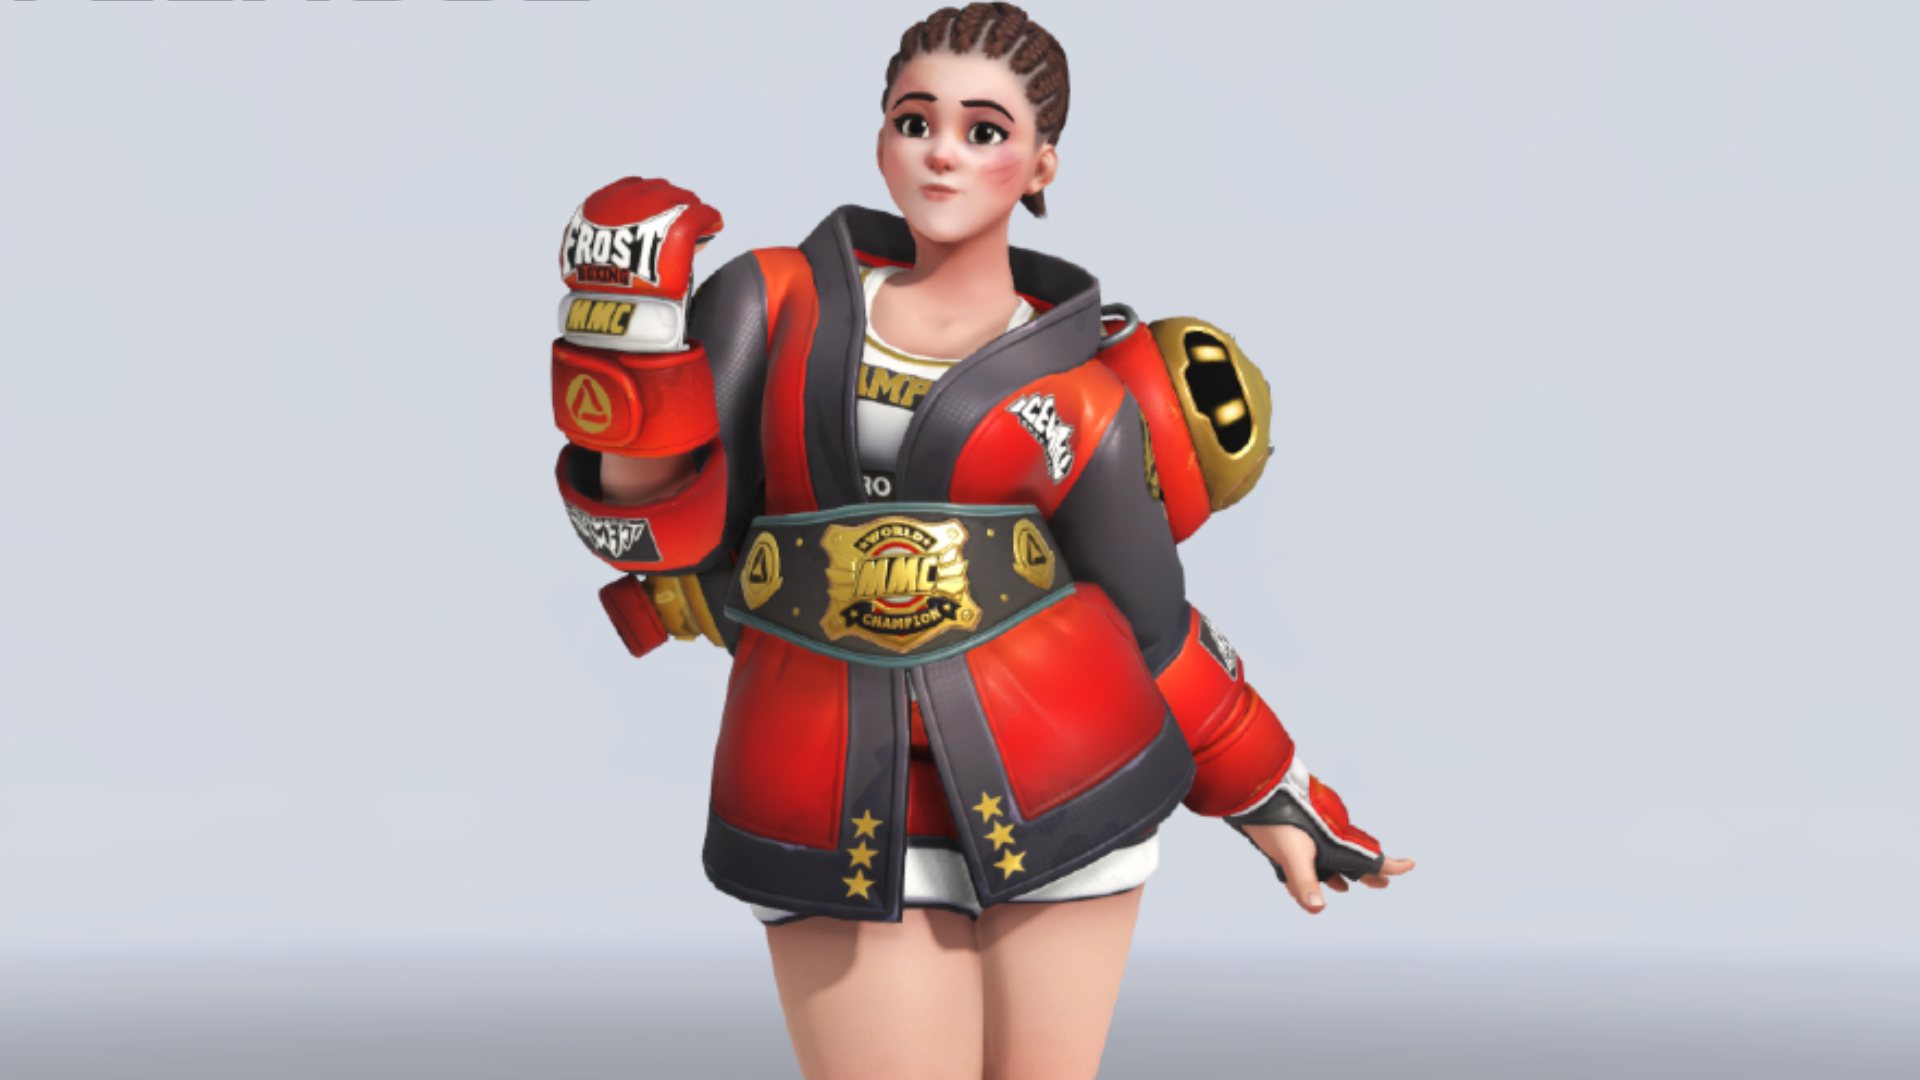 Tage en risiko Decode Forudsætning Overwatch's new Mei skin draws criticism for cultural appropriation | PC  Gamer